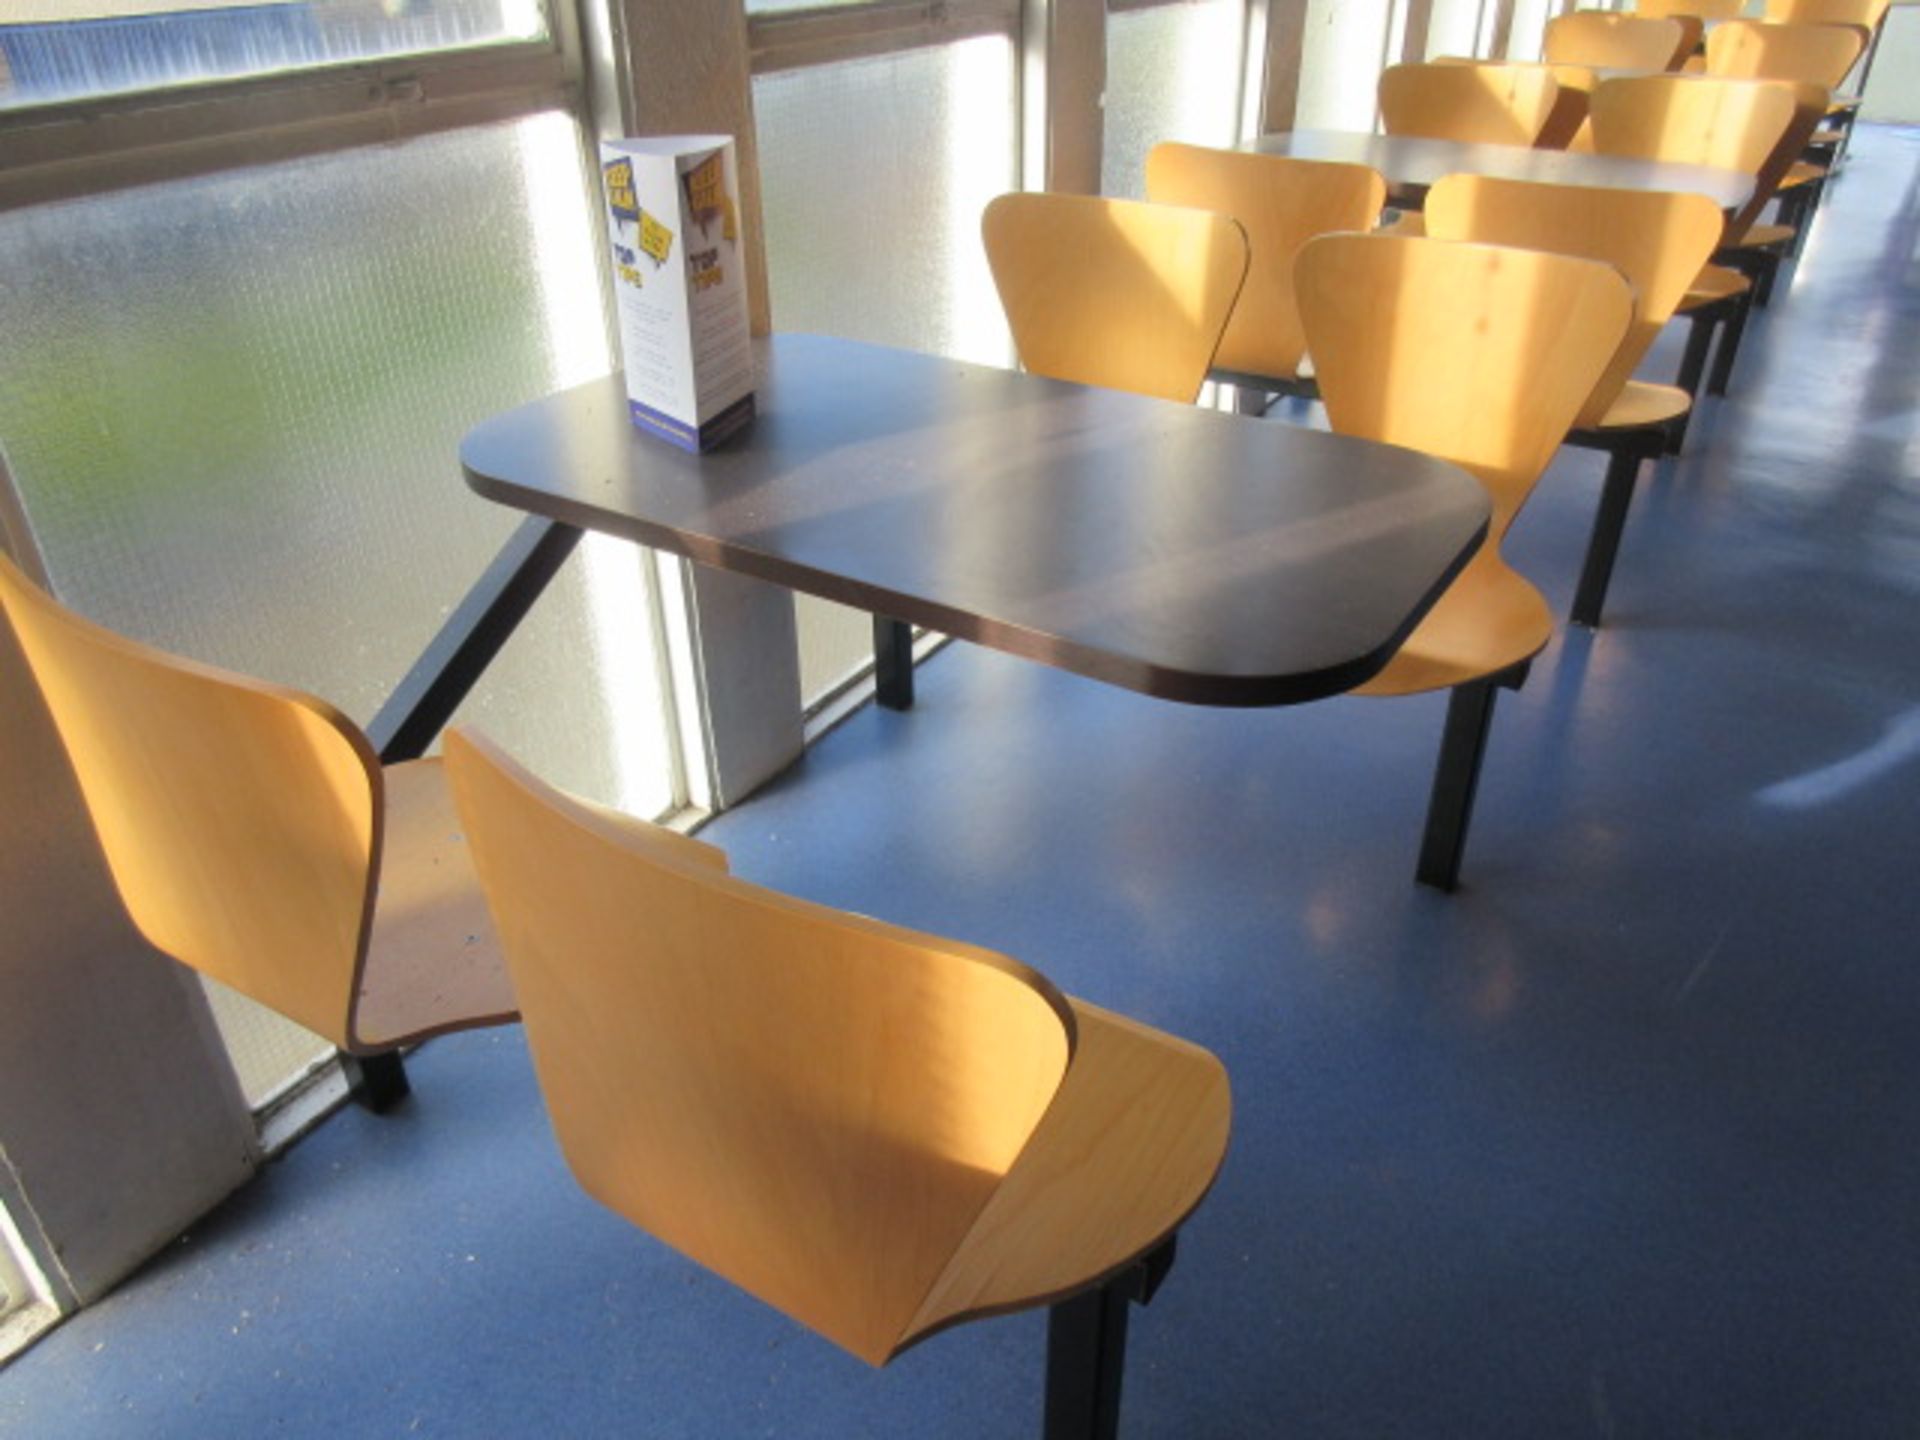 FIVE FOUR SEATER CANTEEN COMBINED TABLE & CHAIR UNITS - Image 2 of 3